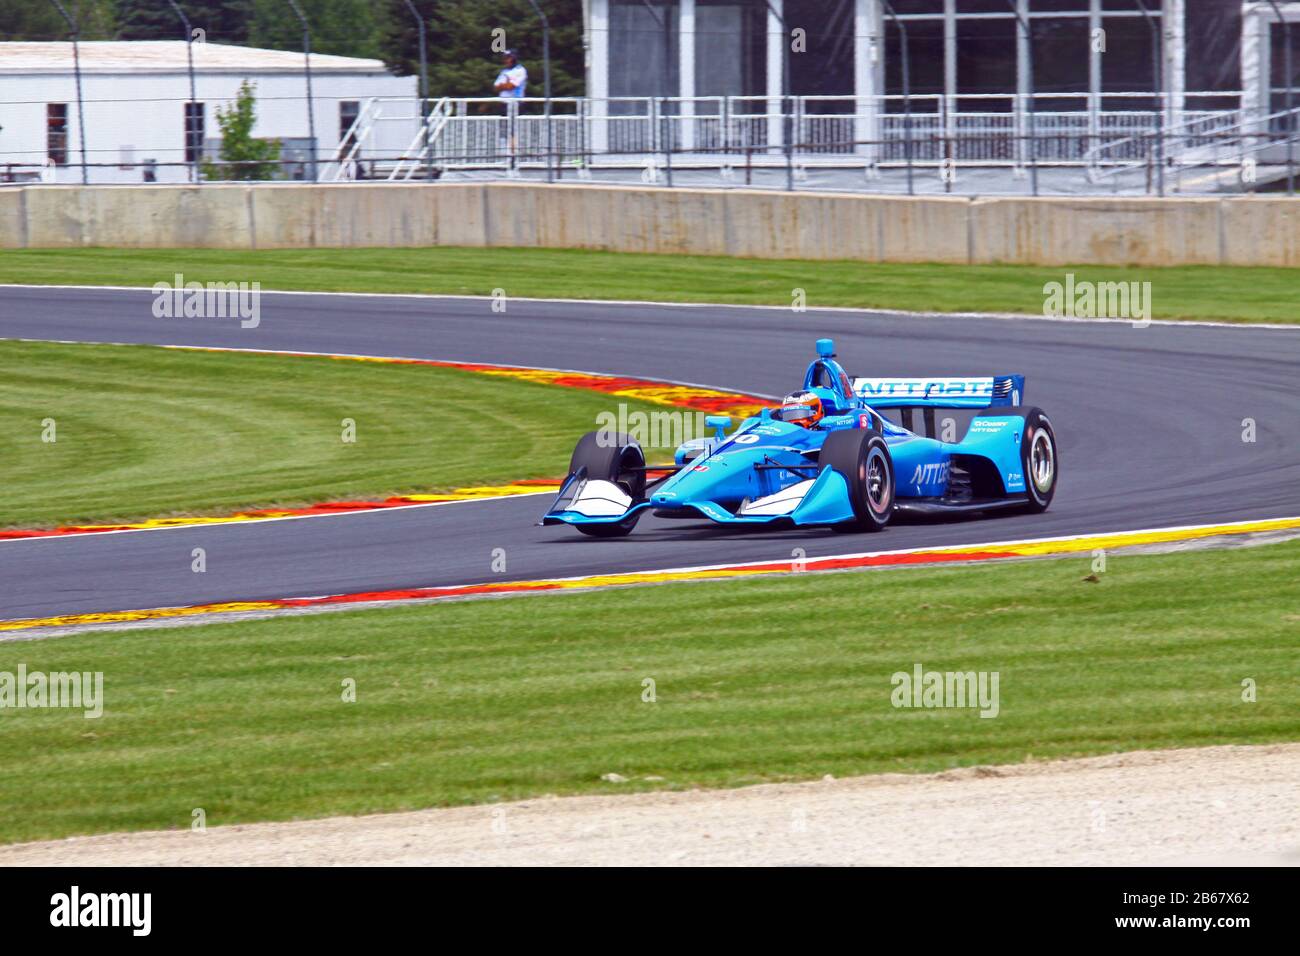 Elkhart Lake, Wisconsin - June 21, 2019: 10 Felix Rosenqvist Chip Ganassi Racing, REV Group Grand Prix at Road America, on course for practice session Stock Photo